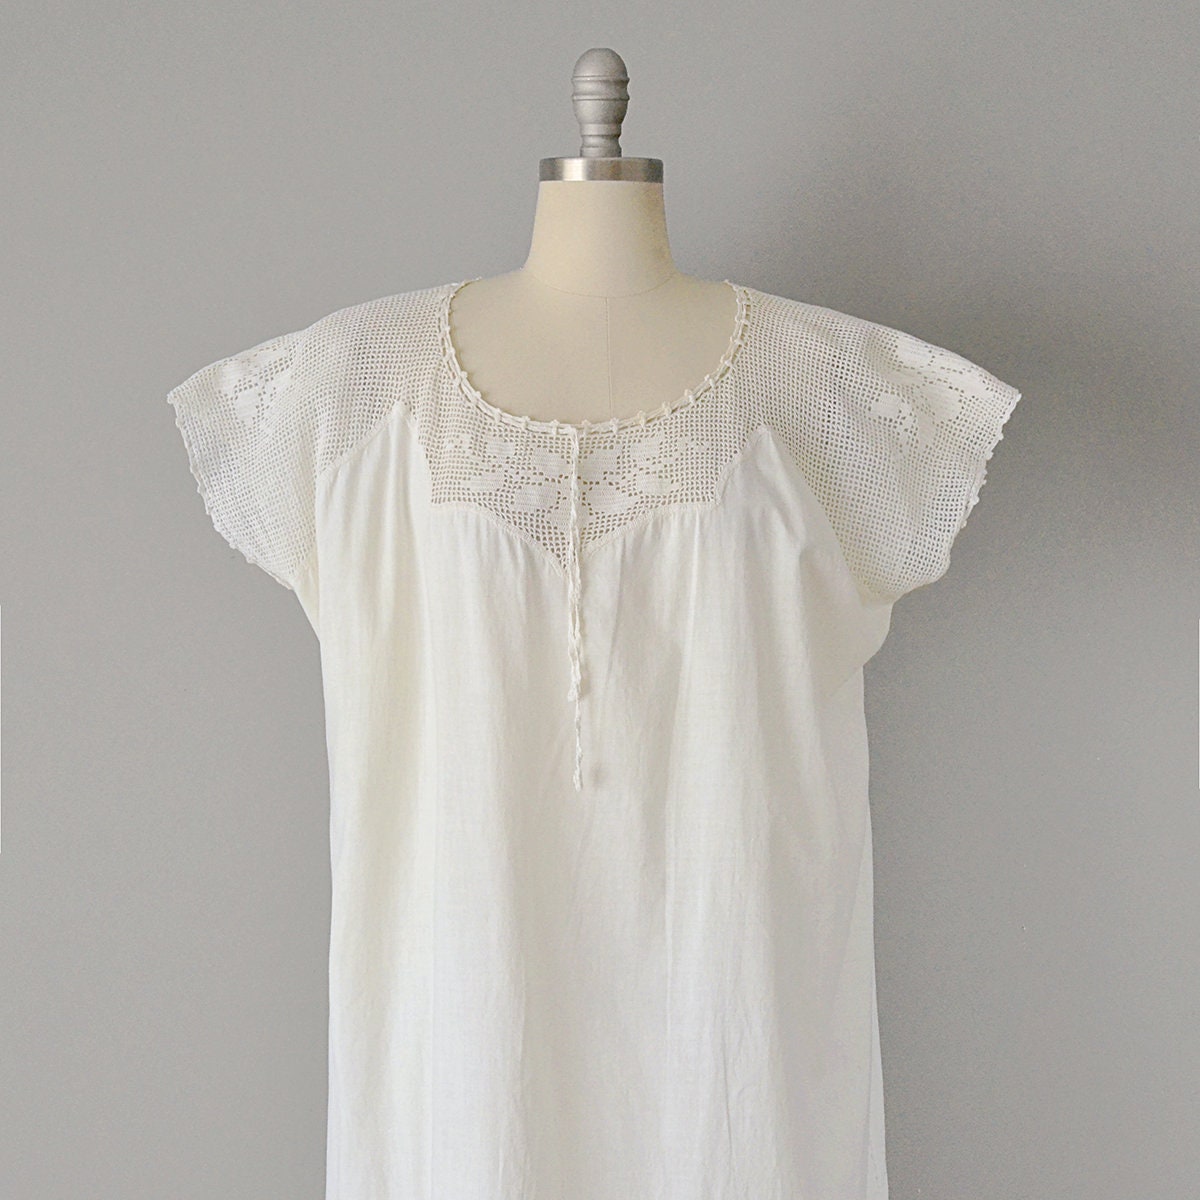 1800s Dress // Victorian Off-white Cotton and Lace Chemise // | Etsy